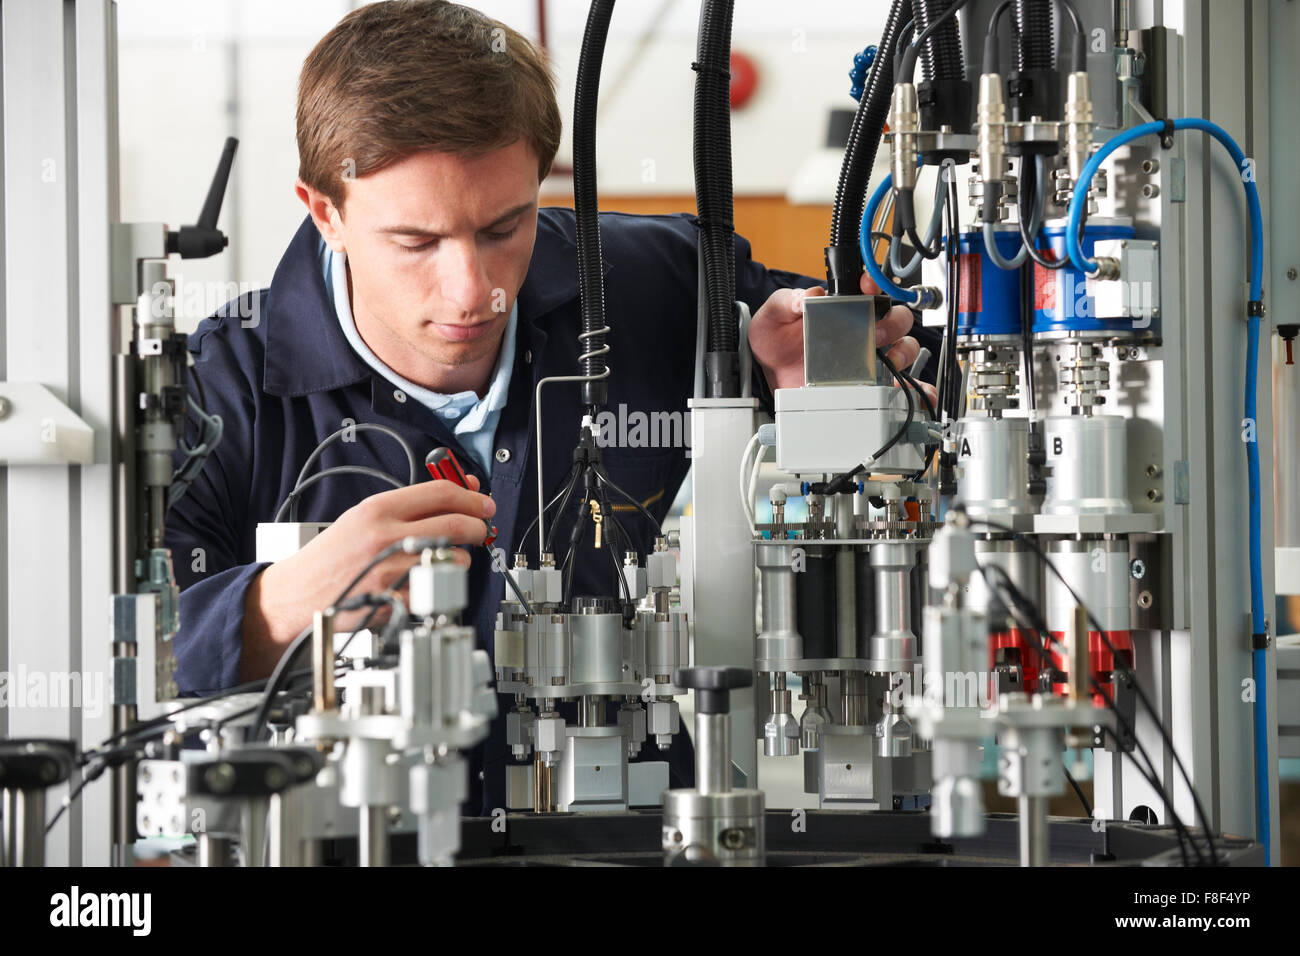 Engineer Working On Complex Equipment In Factory Stock Photo